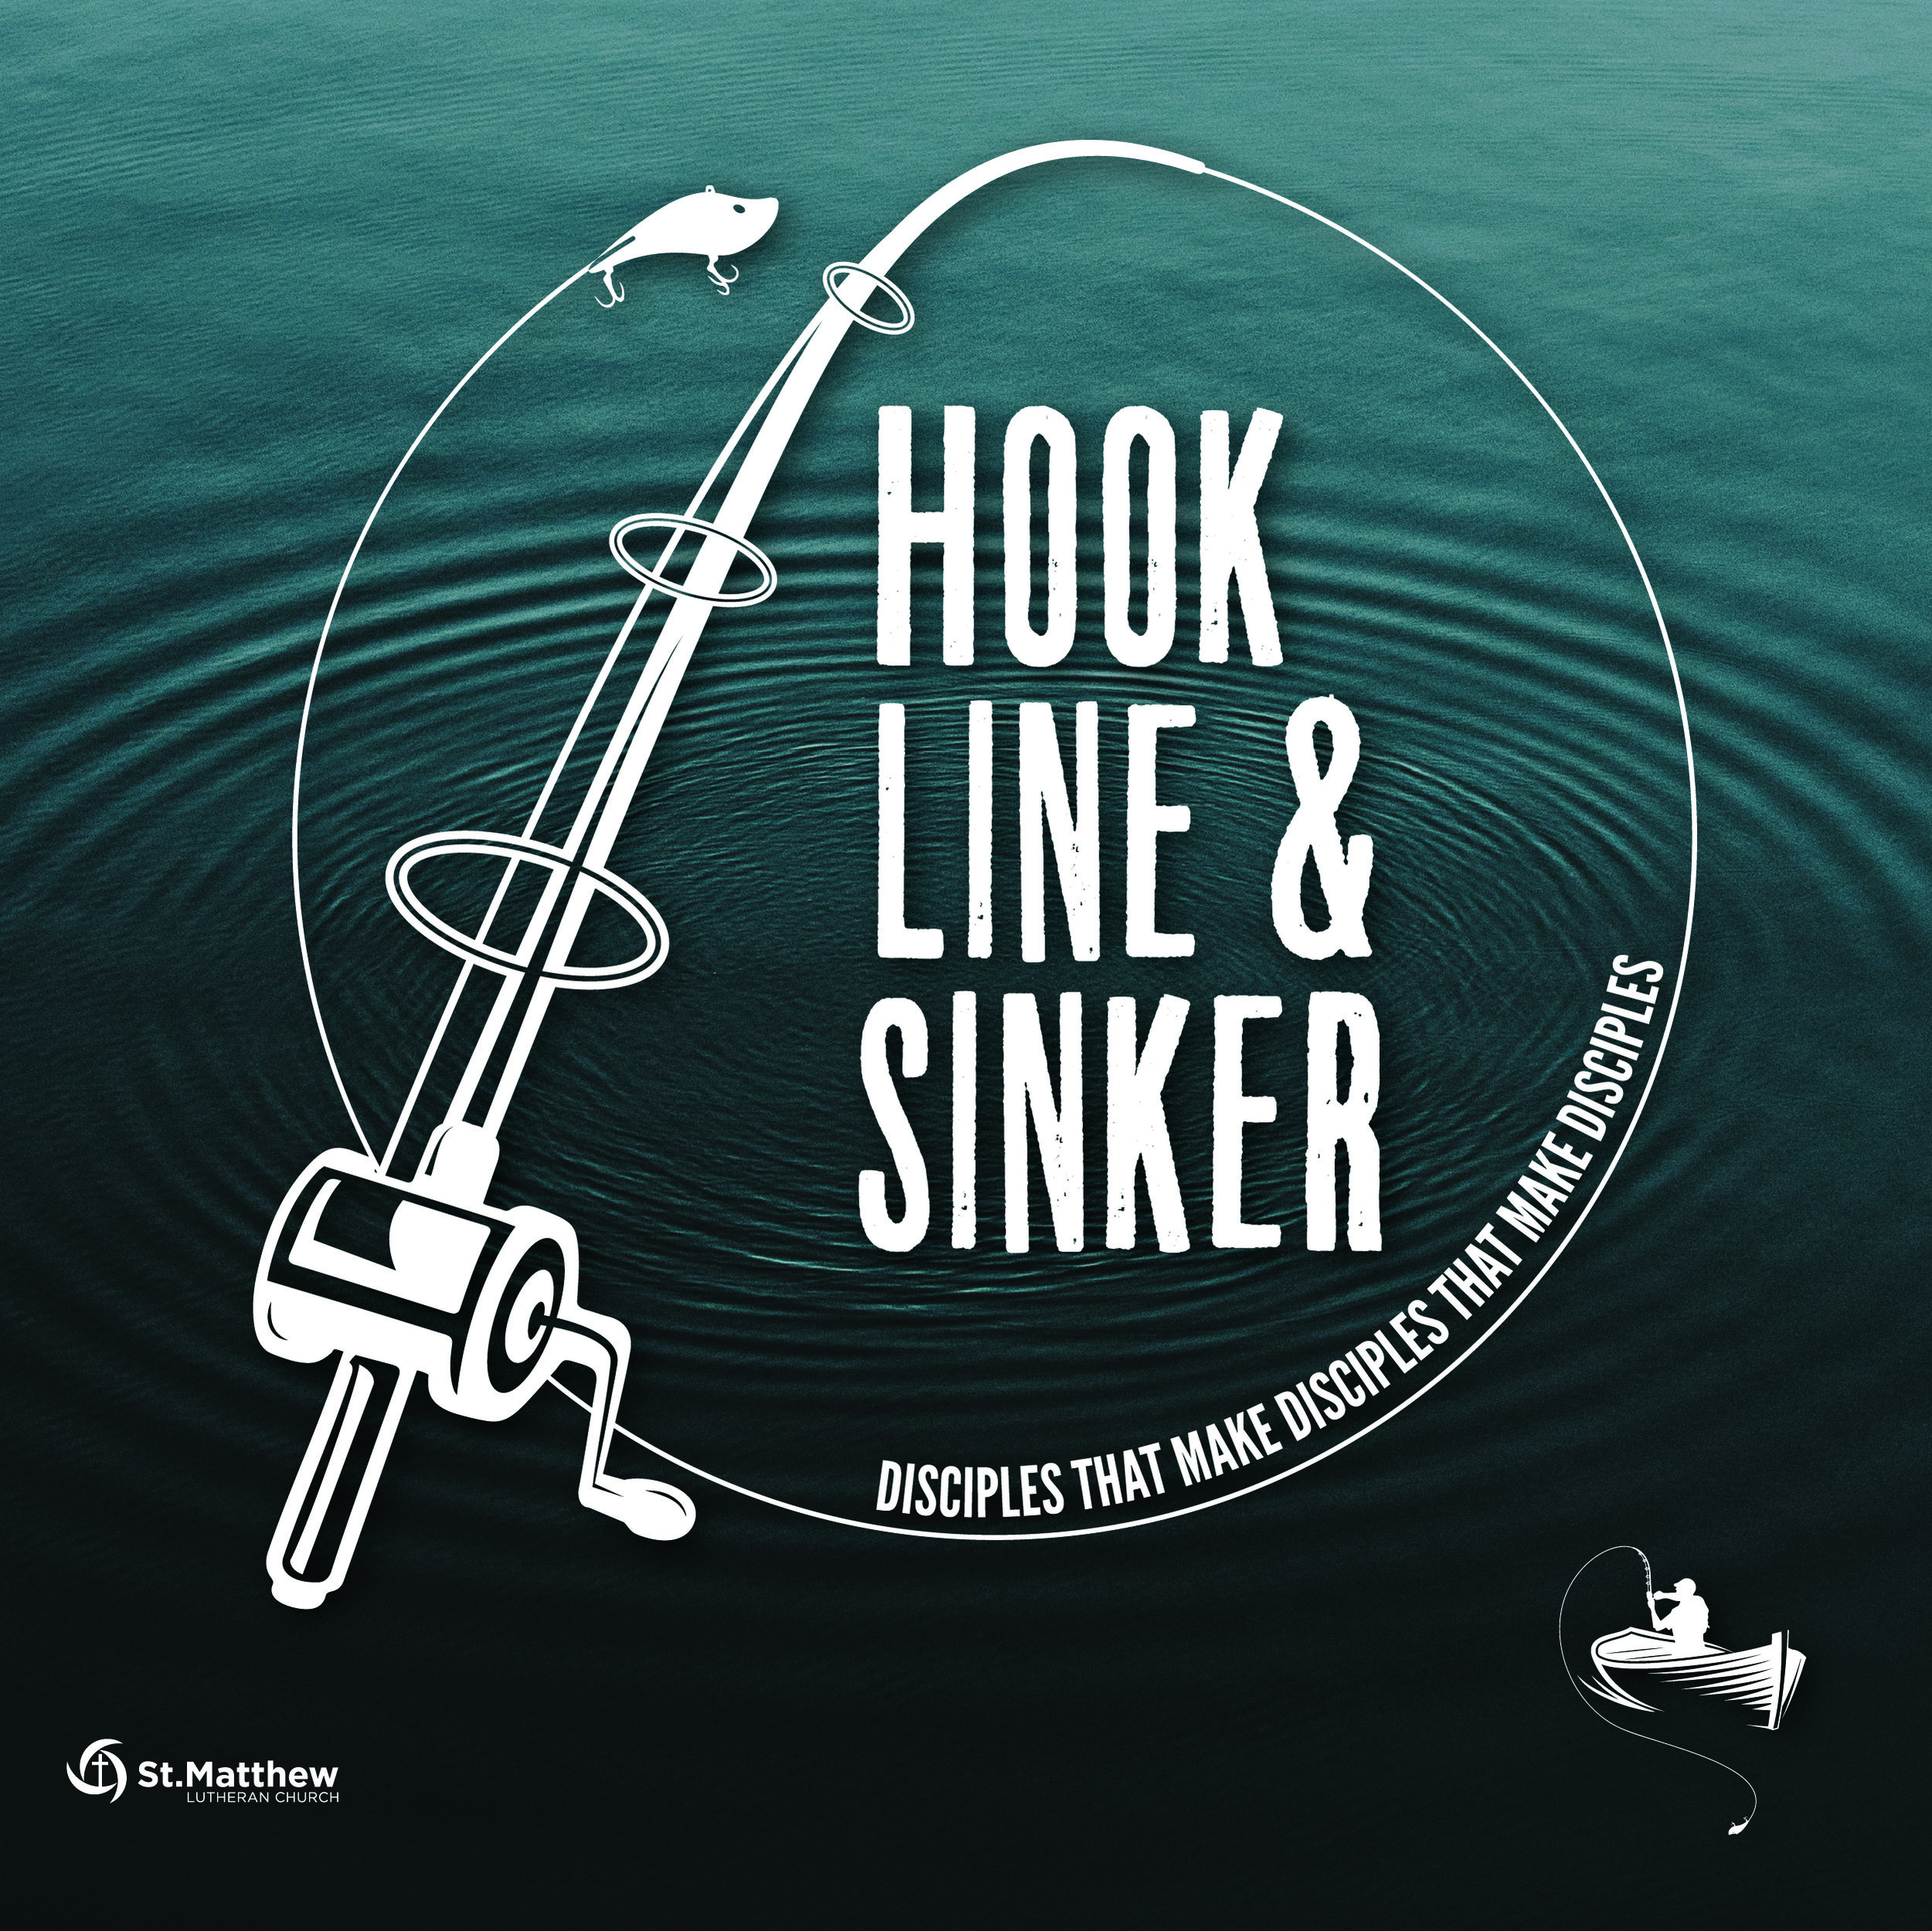 A hook set rod to up sinker fishing and How To